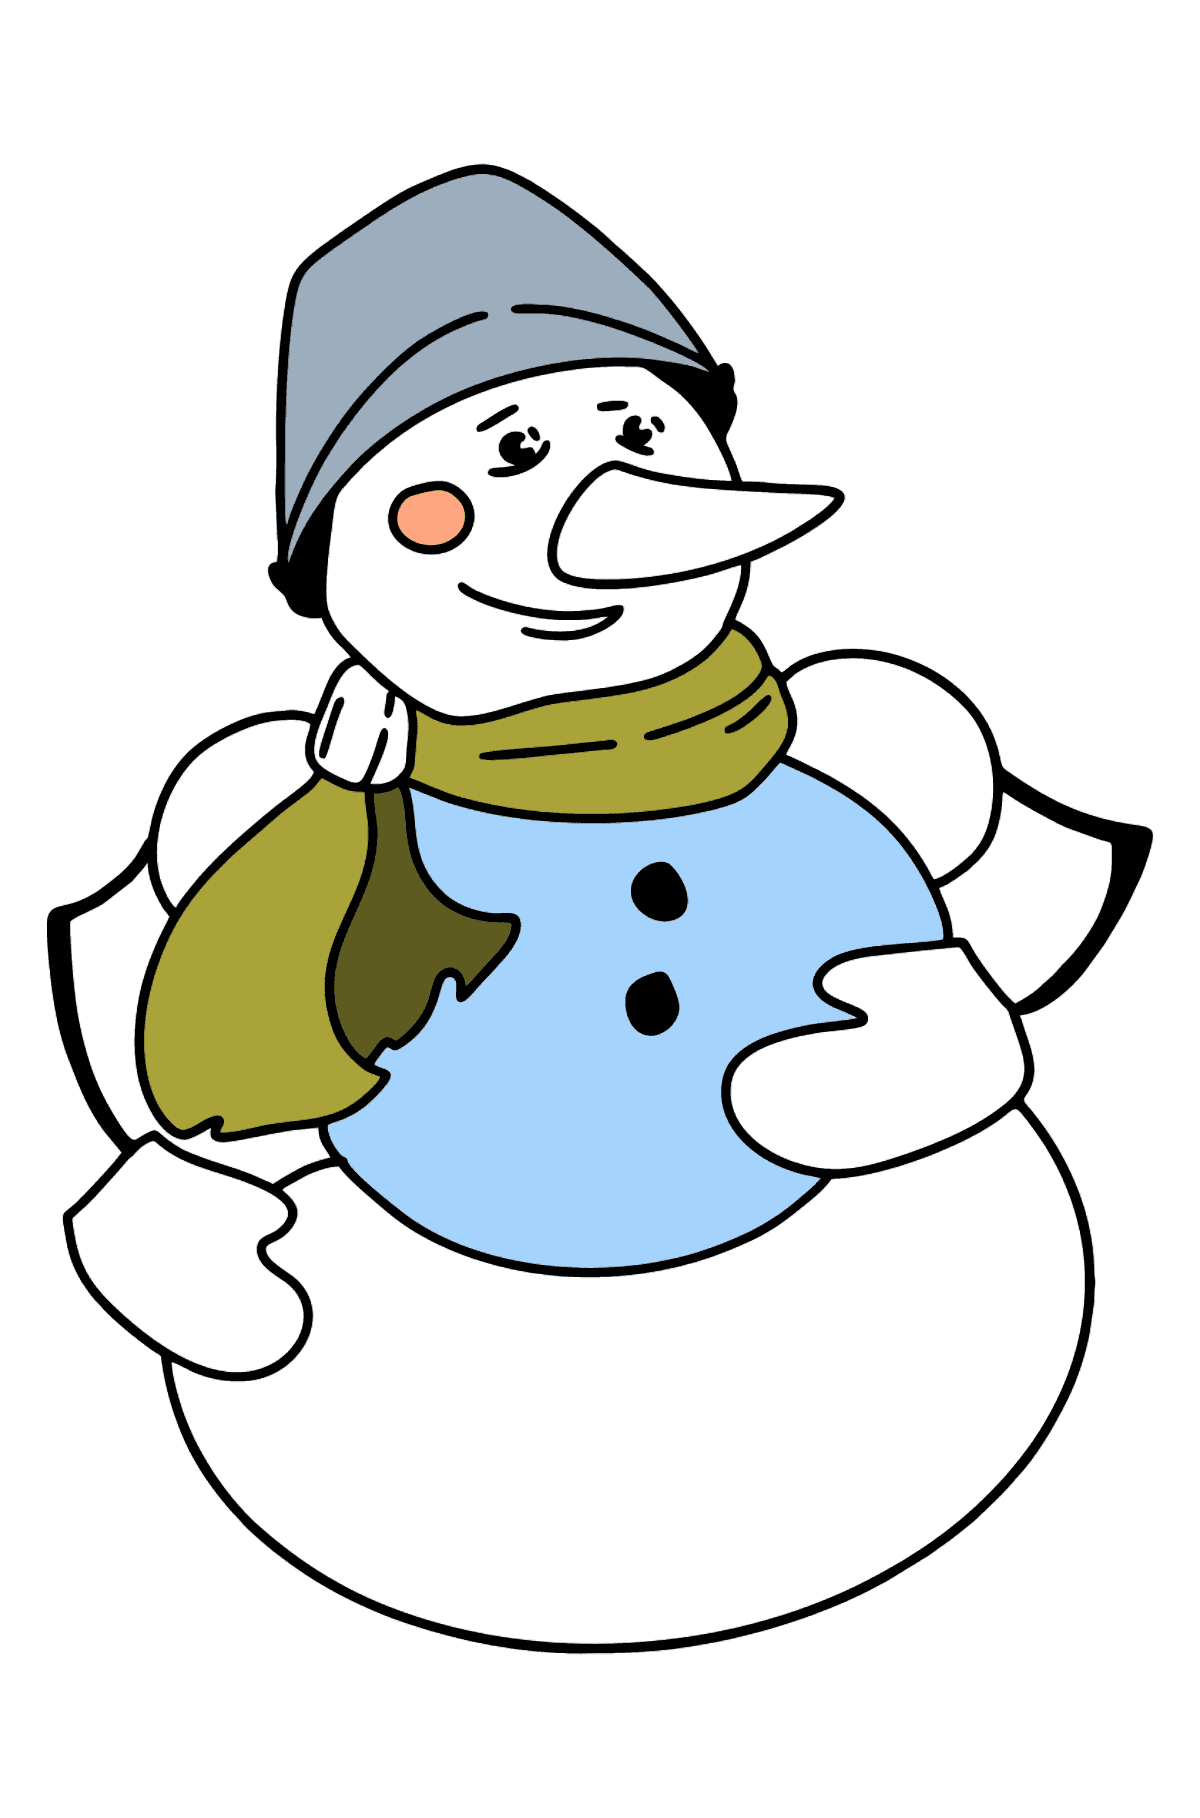 Snowman coloring page - Coloring Pages for Kids